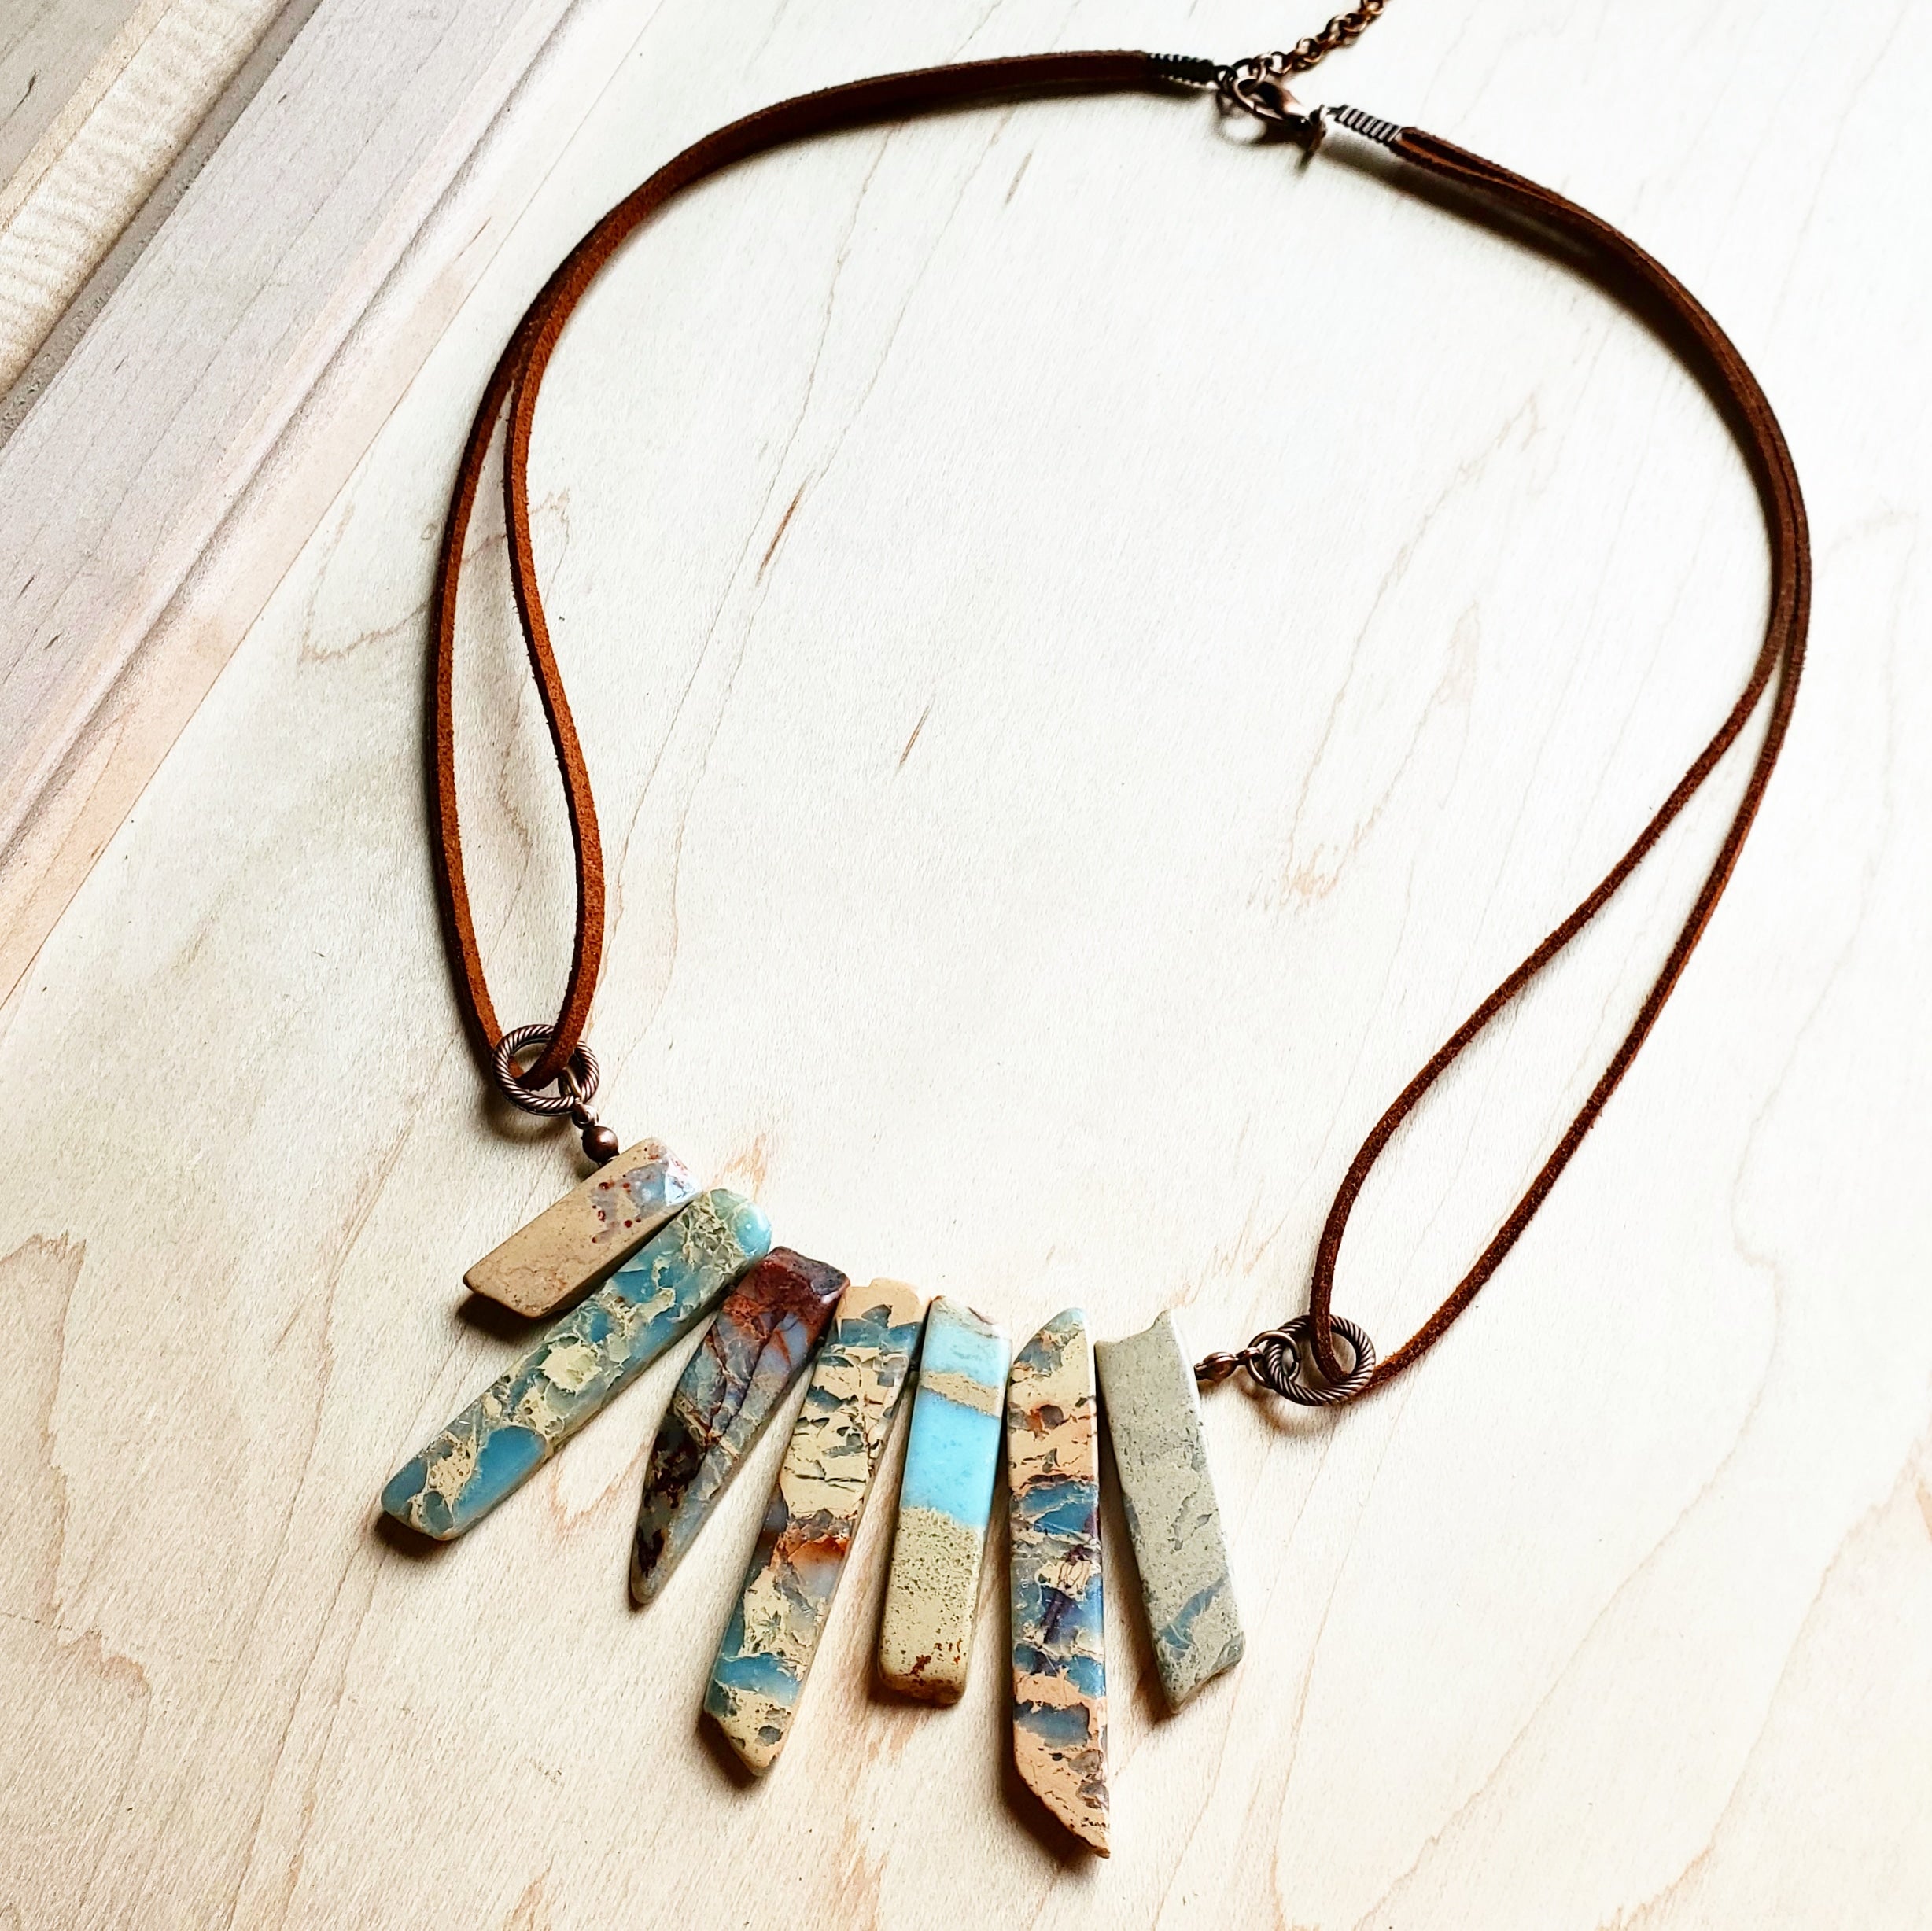 The Jewelry Junkie Leather Cord Necklace, Aqua